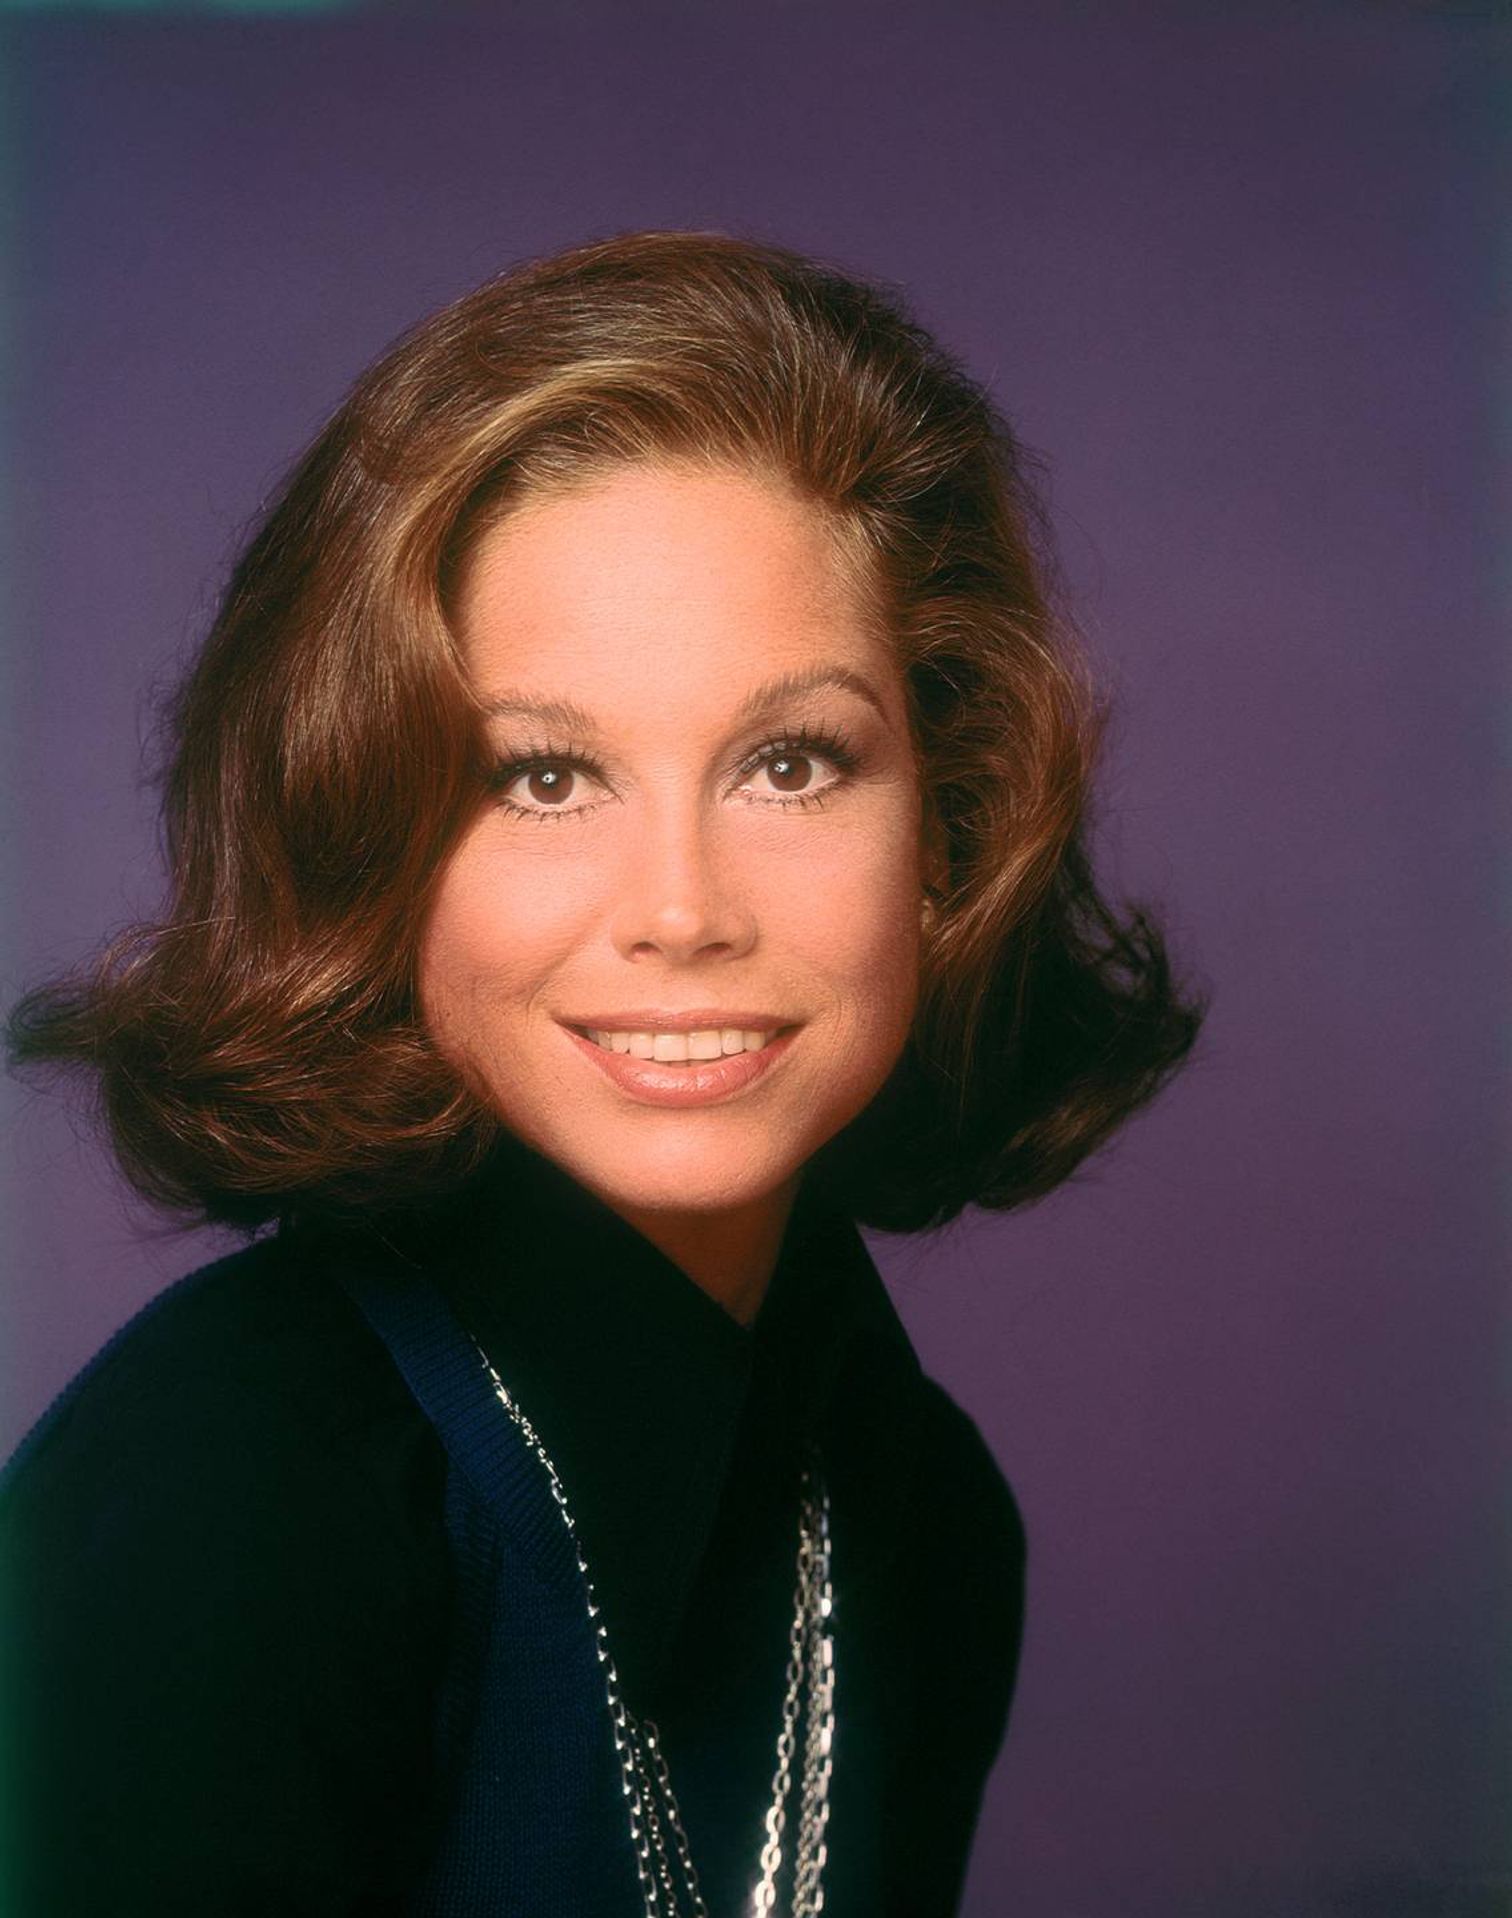 (Original Caption) Close-up of smiling actress Mary Tyler Moore who stars in the television series The Mary Tyler Moore Show, circa 1975.